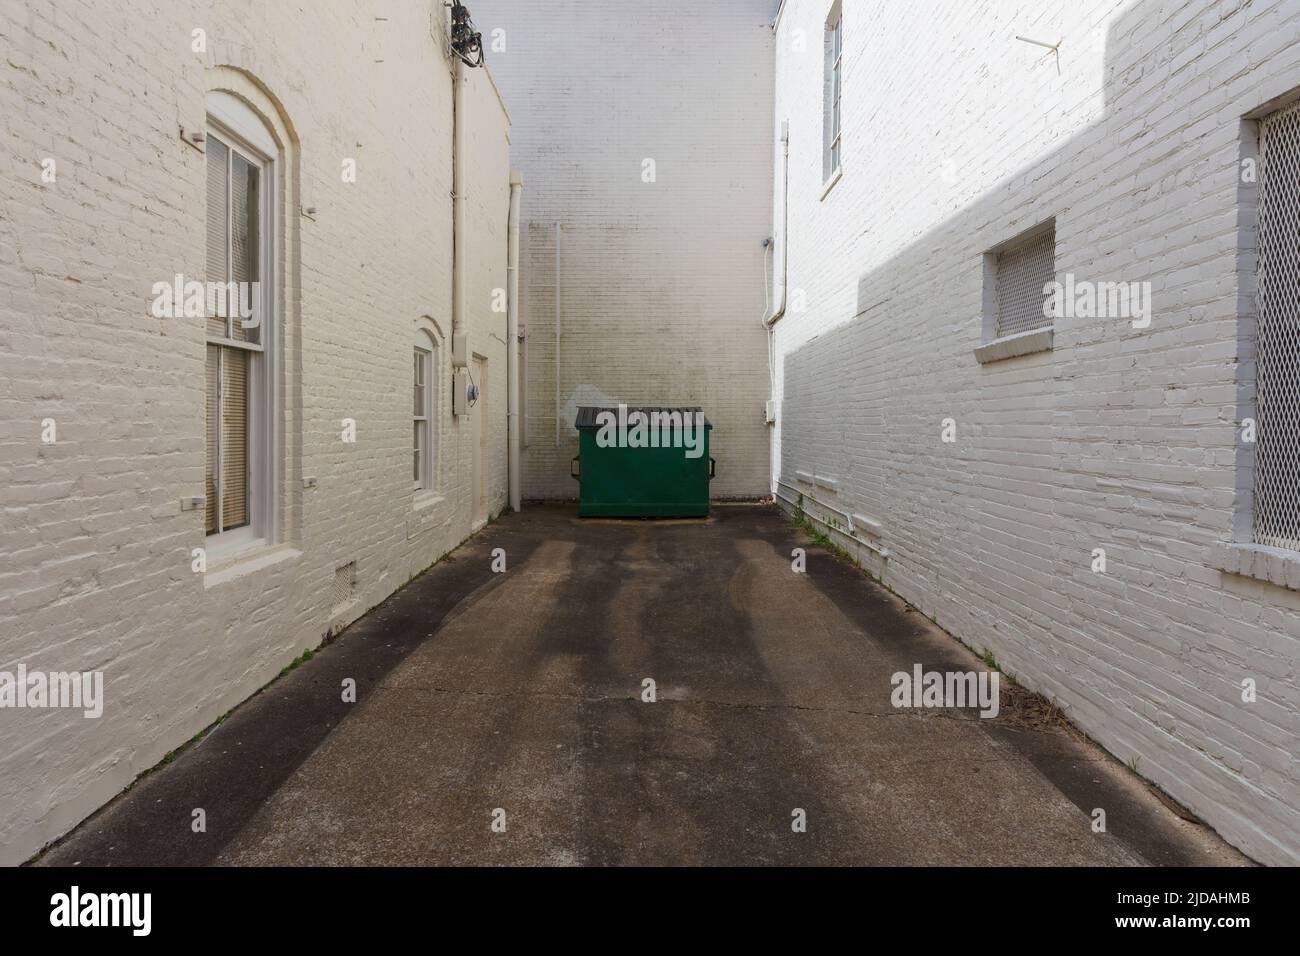 Recycling bin at at end of an urban alleyway in a small town. Stock Photo